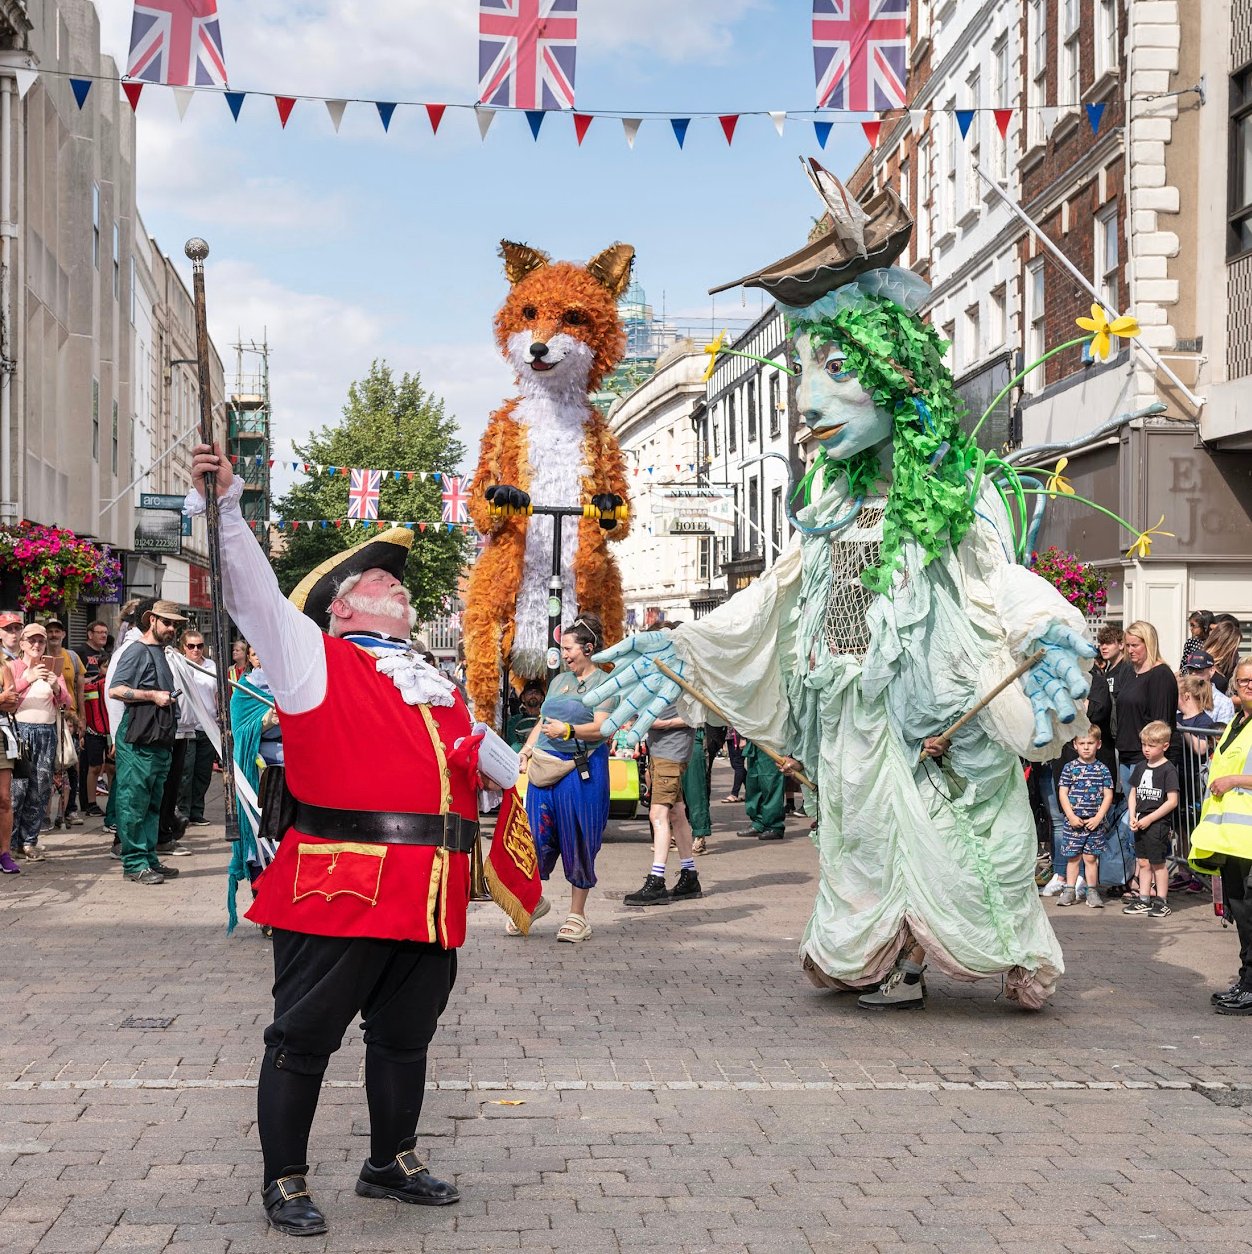 A carnival street scene with a town crier character in the foreground and large puppets and crowds in the background.